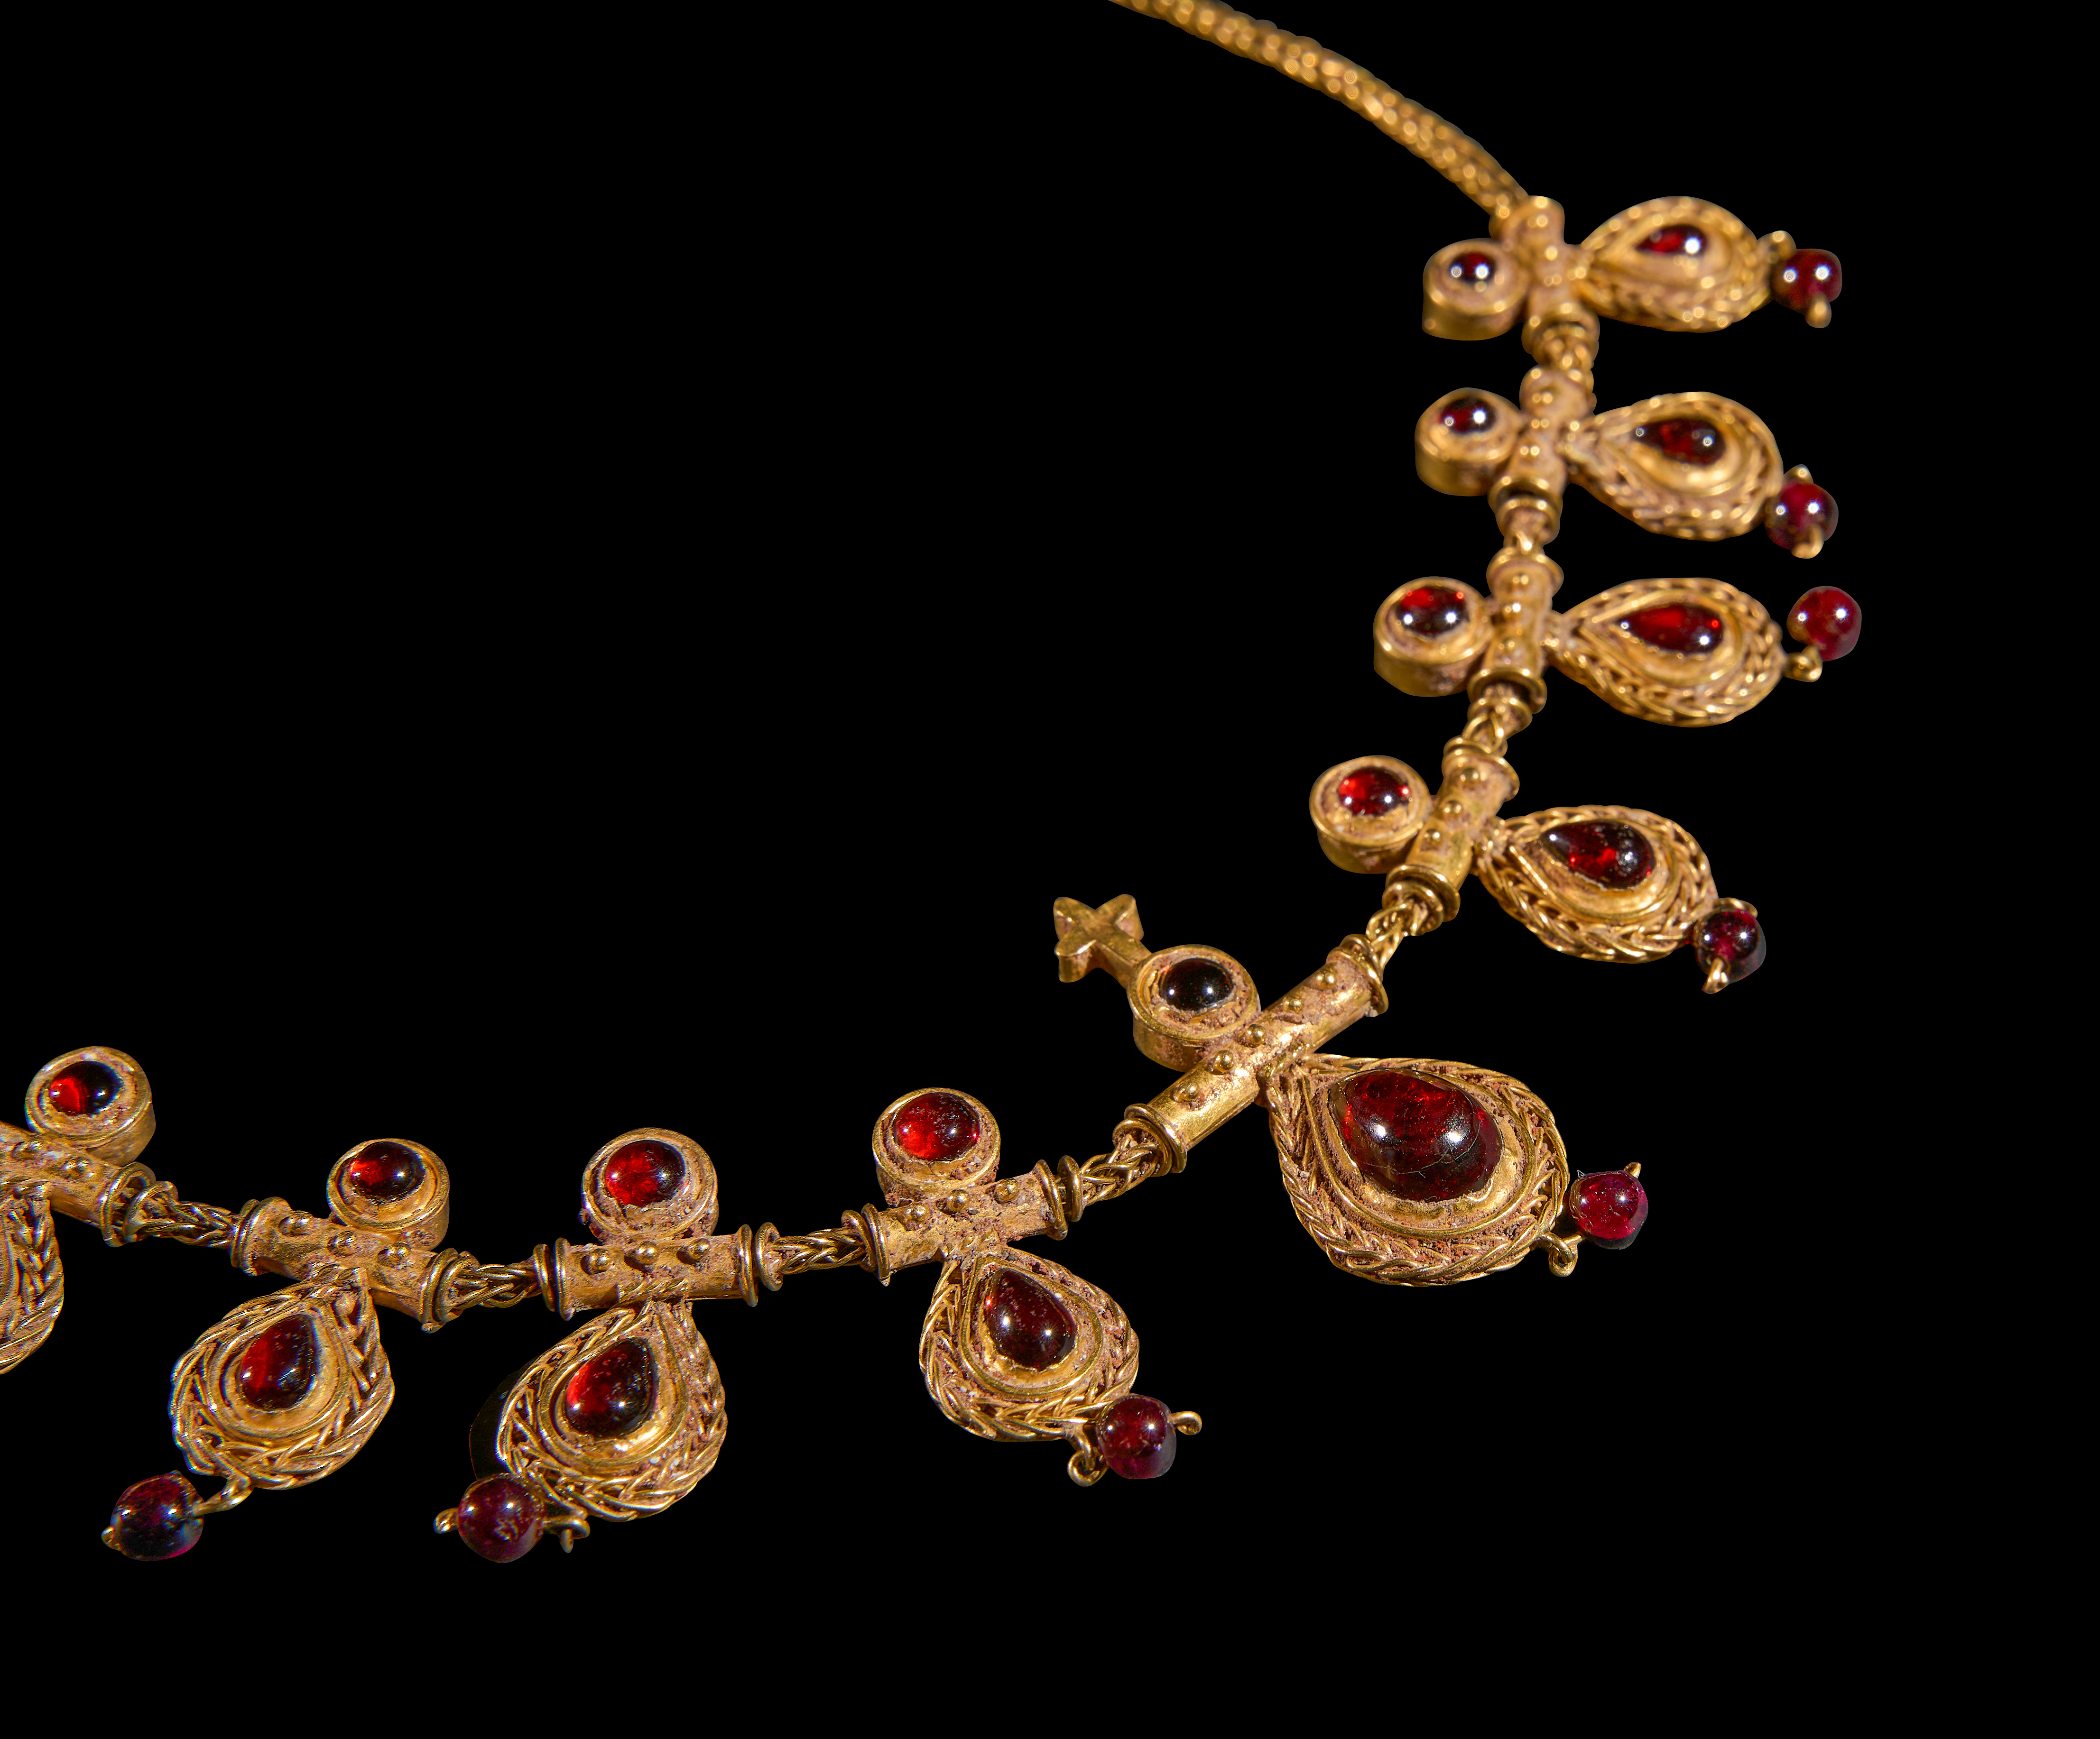 AN IMPRESSIVE BYZANTINE GOLD CROSS NECKLACE SET WITH CABOCHON GEMSTONES, CIRCA 3RD CENTURY A.D. - Image 4 of 4